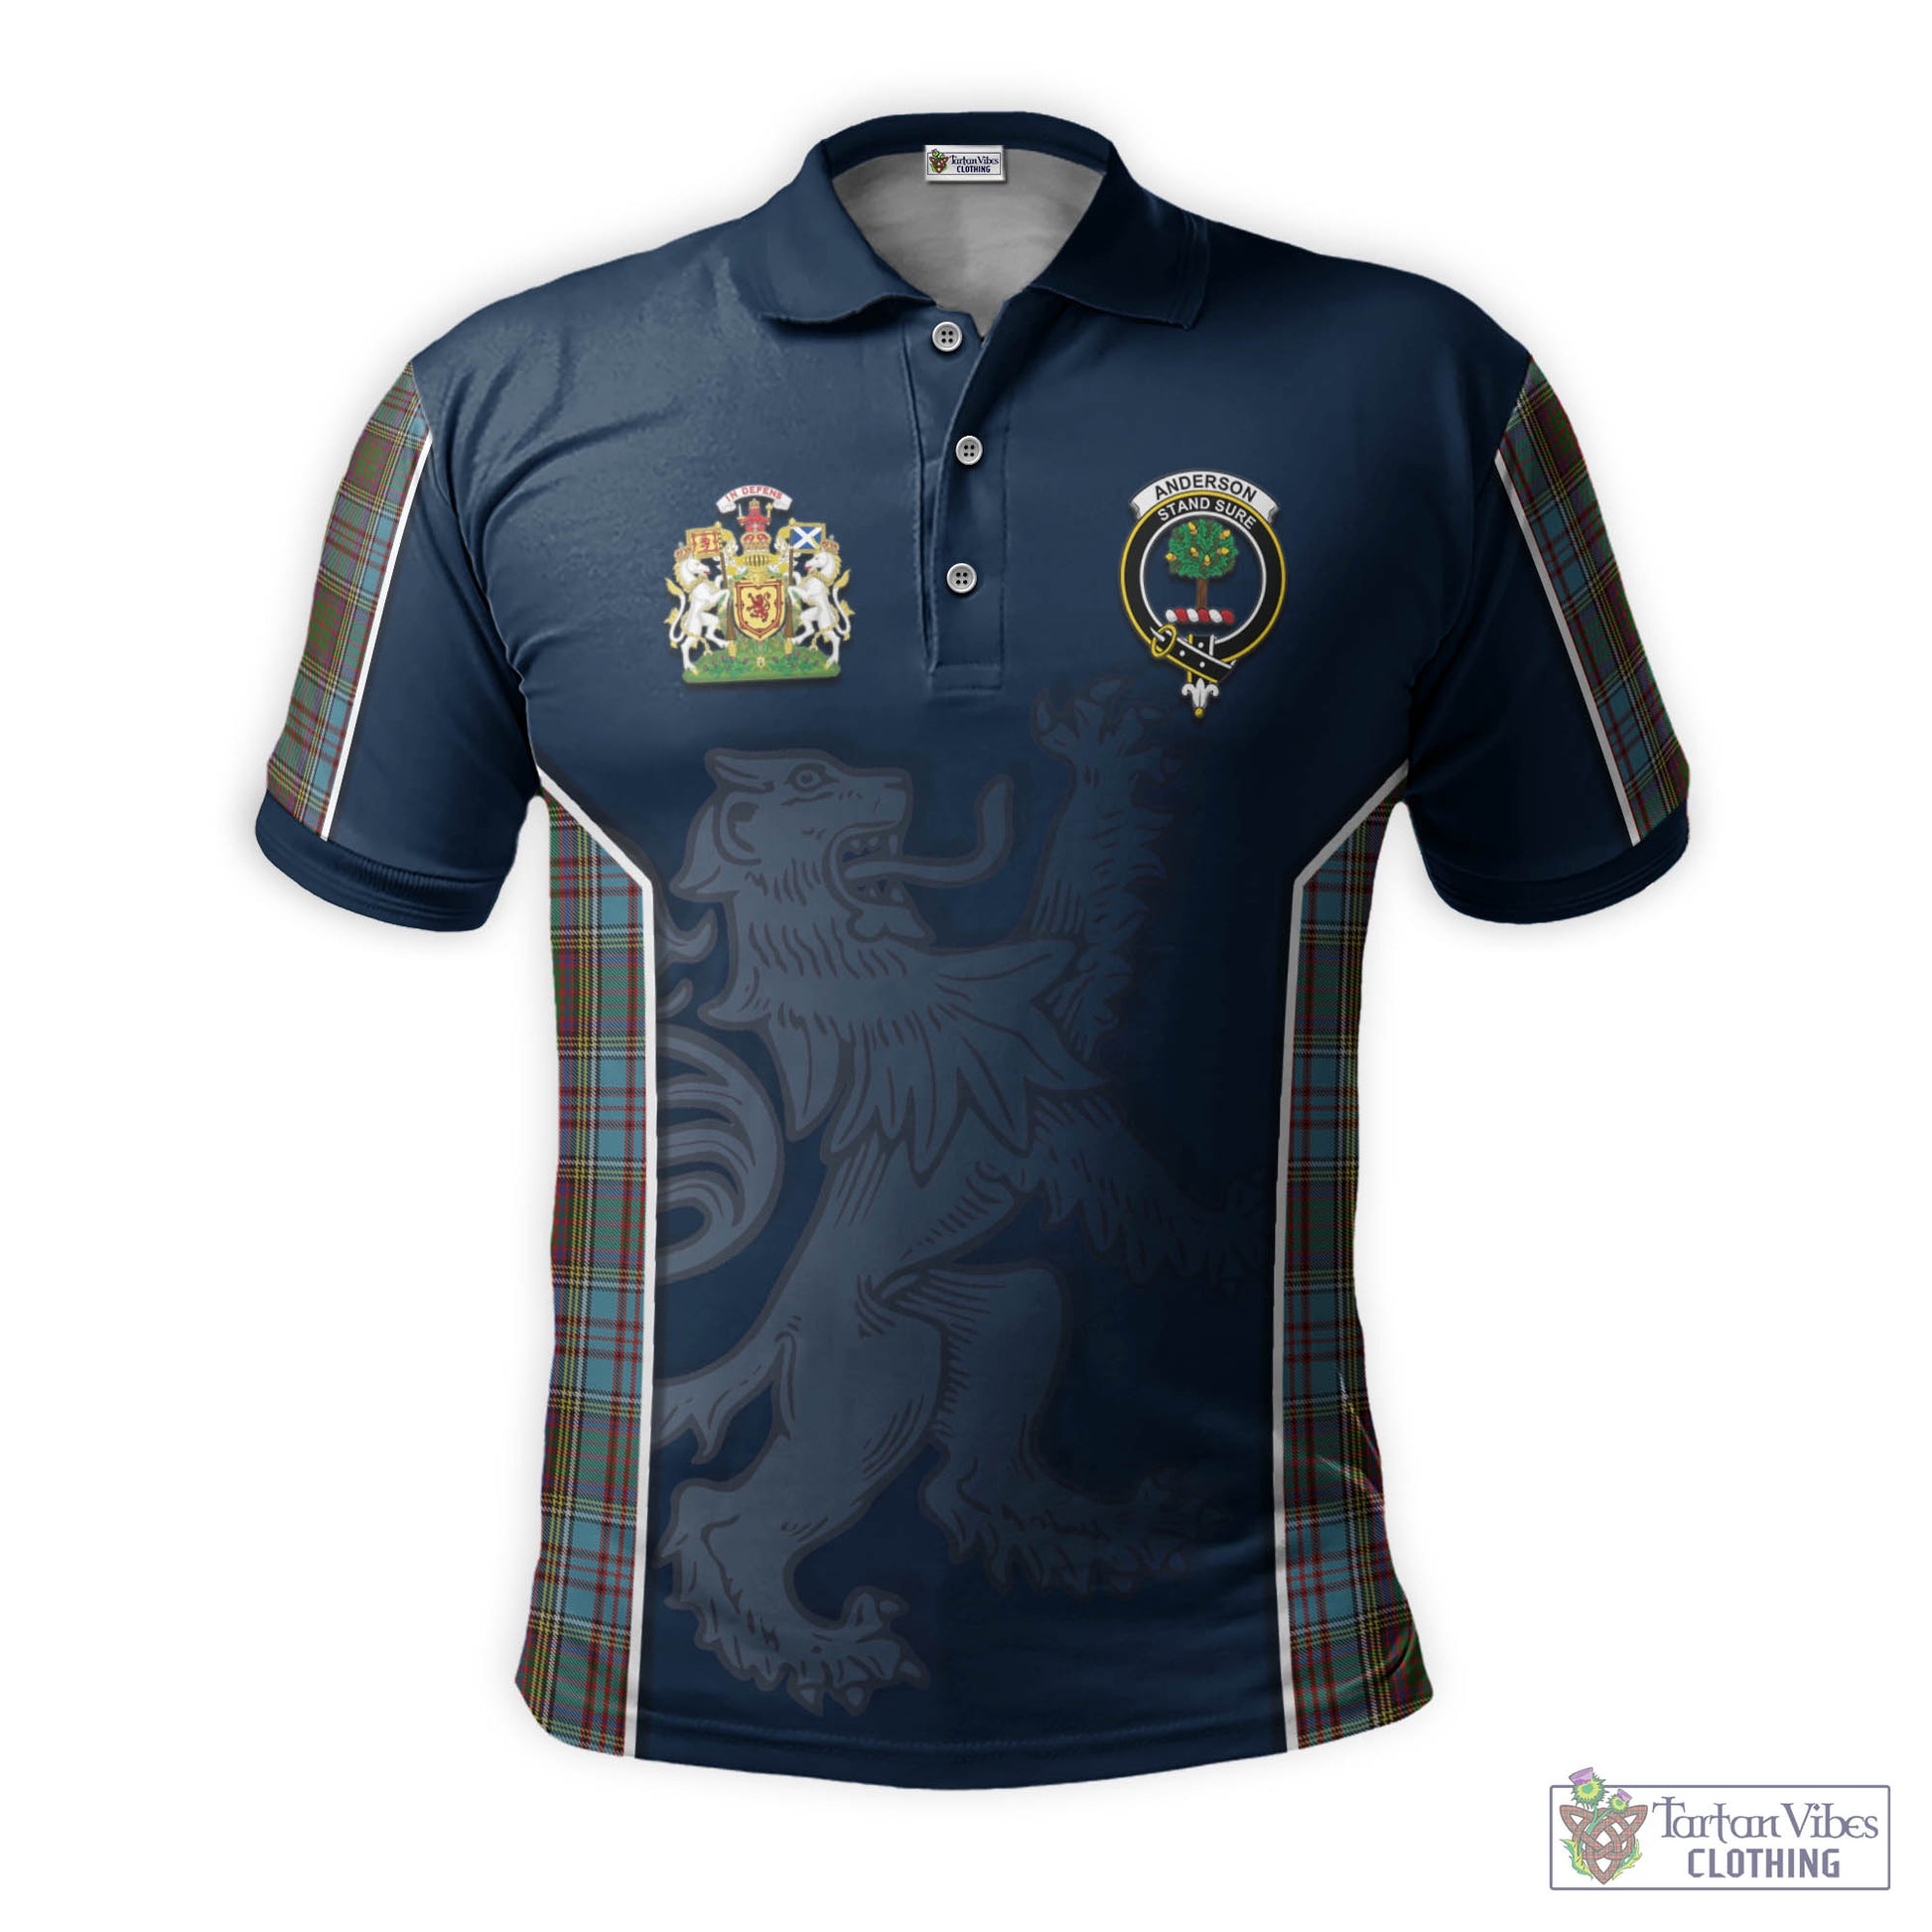 Tartan Vibes Clothing Anderson Tartan Men's Polo Shirt with Family Crest and Lion Rampant Vibes Sport Style